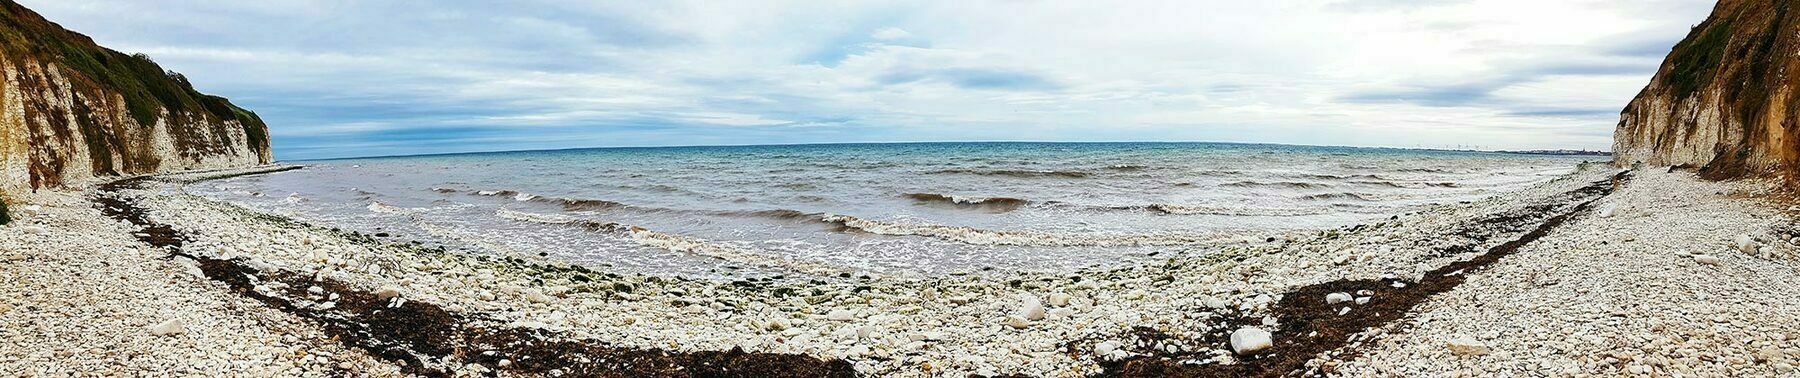 Panoramic view looking out to sea from a beach covered in white stones and pebbles. Either side are chalk cliffs.